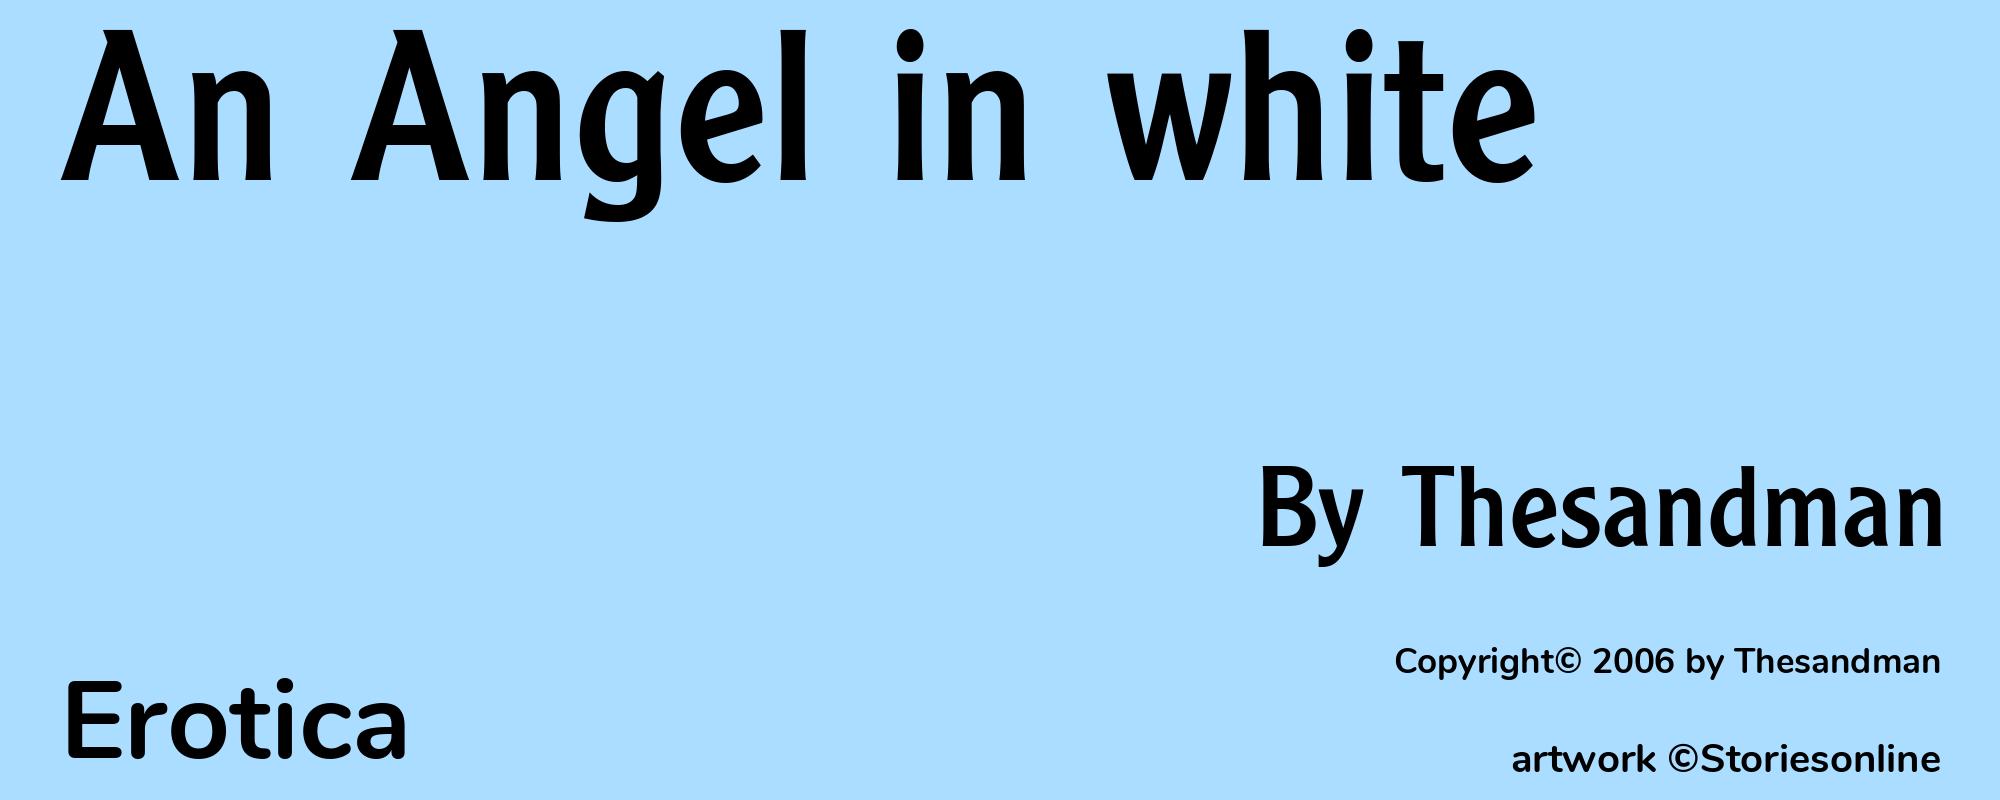 An Angel in white - Cover